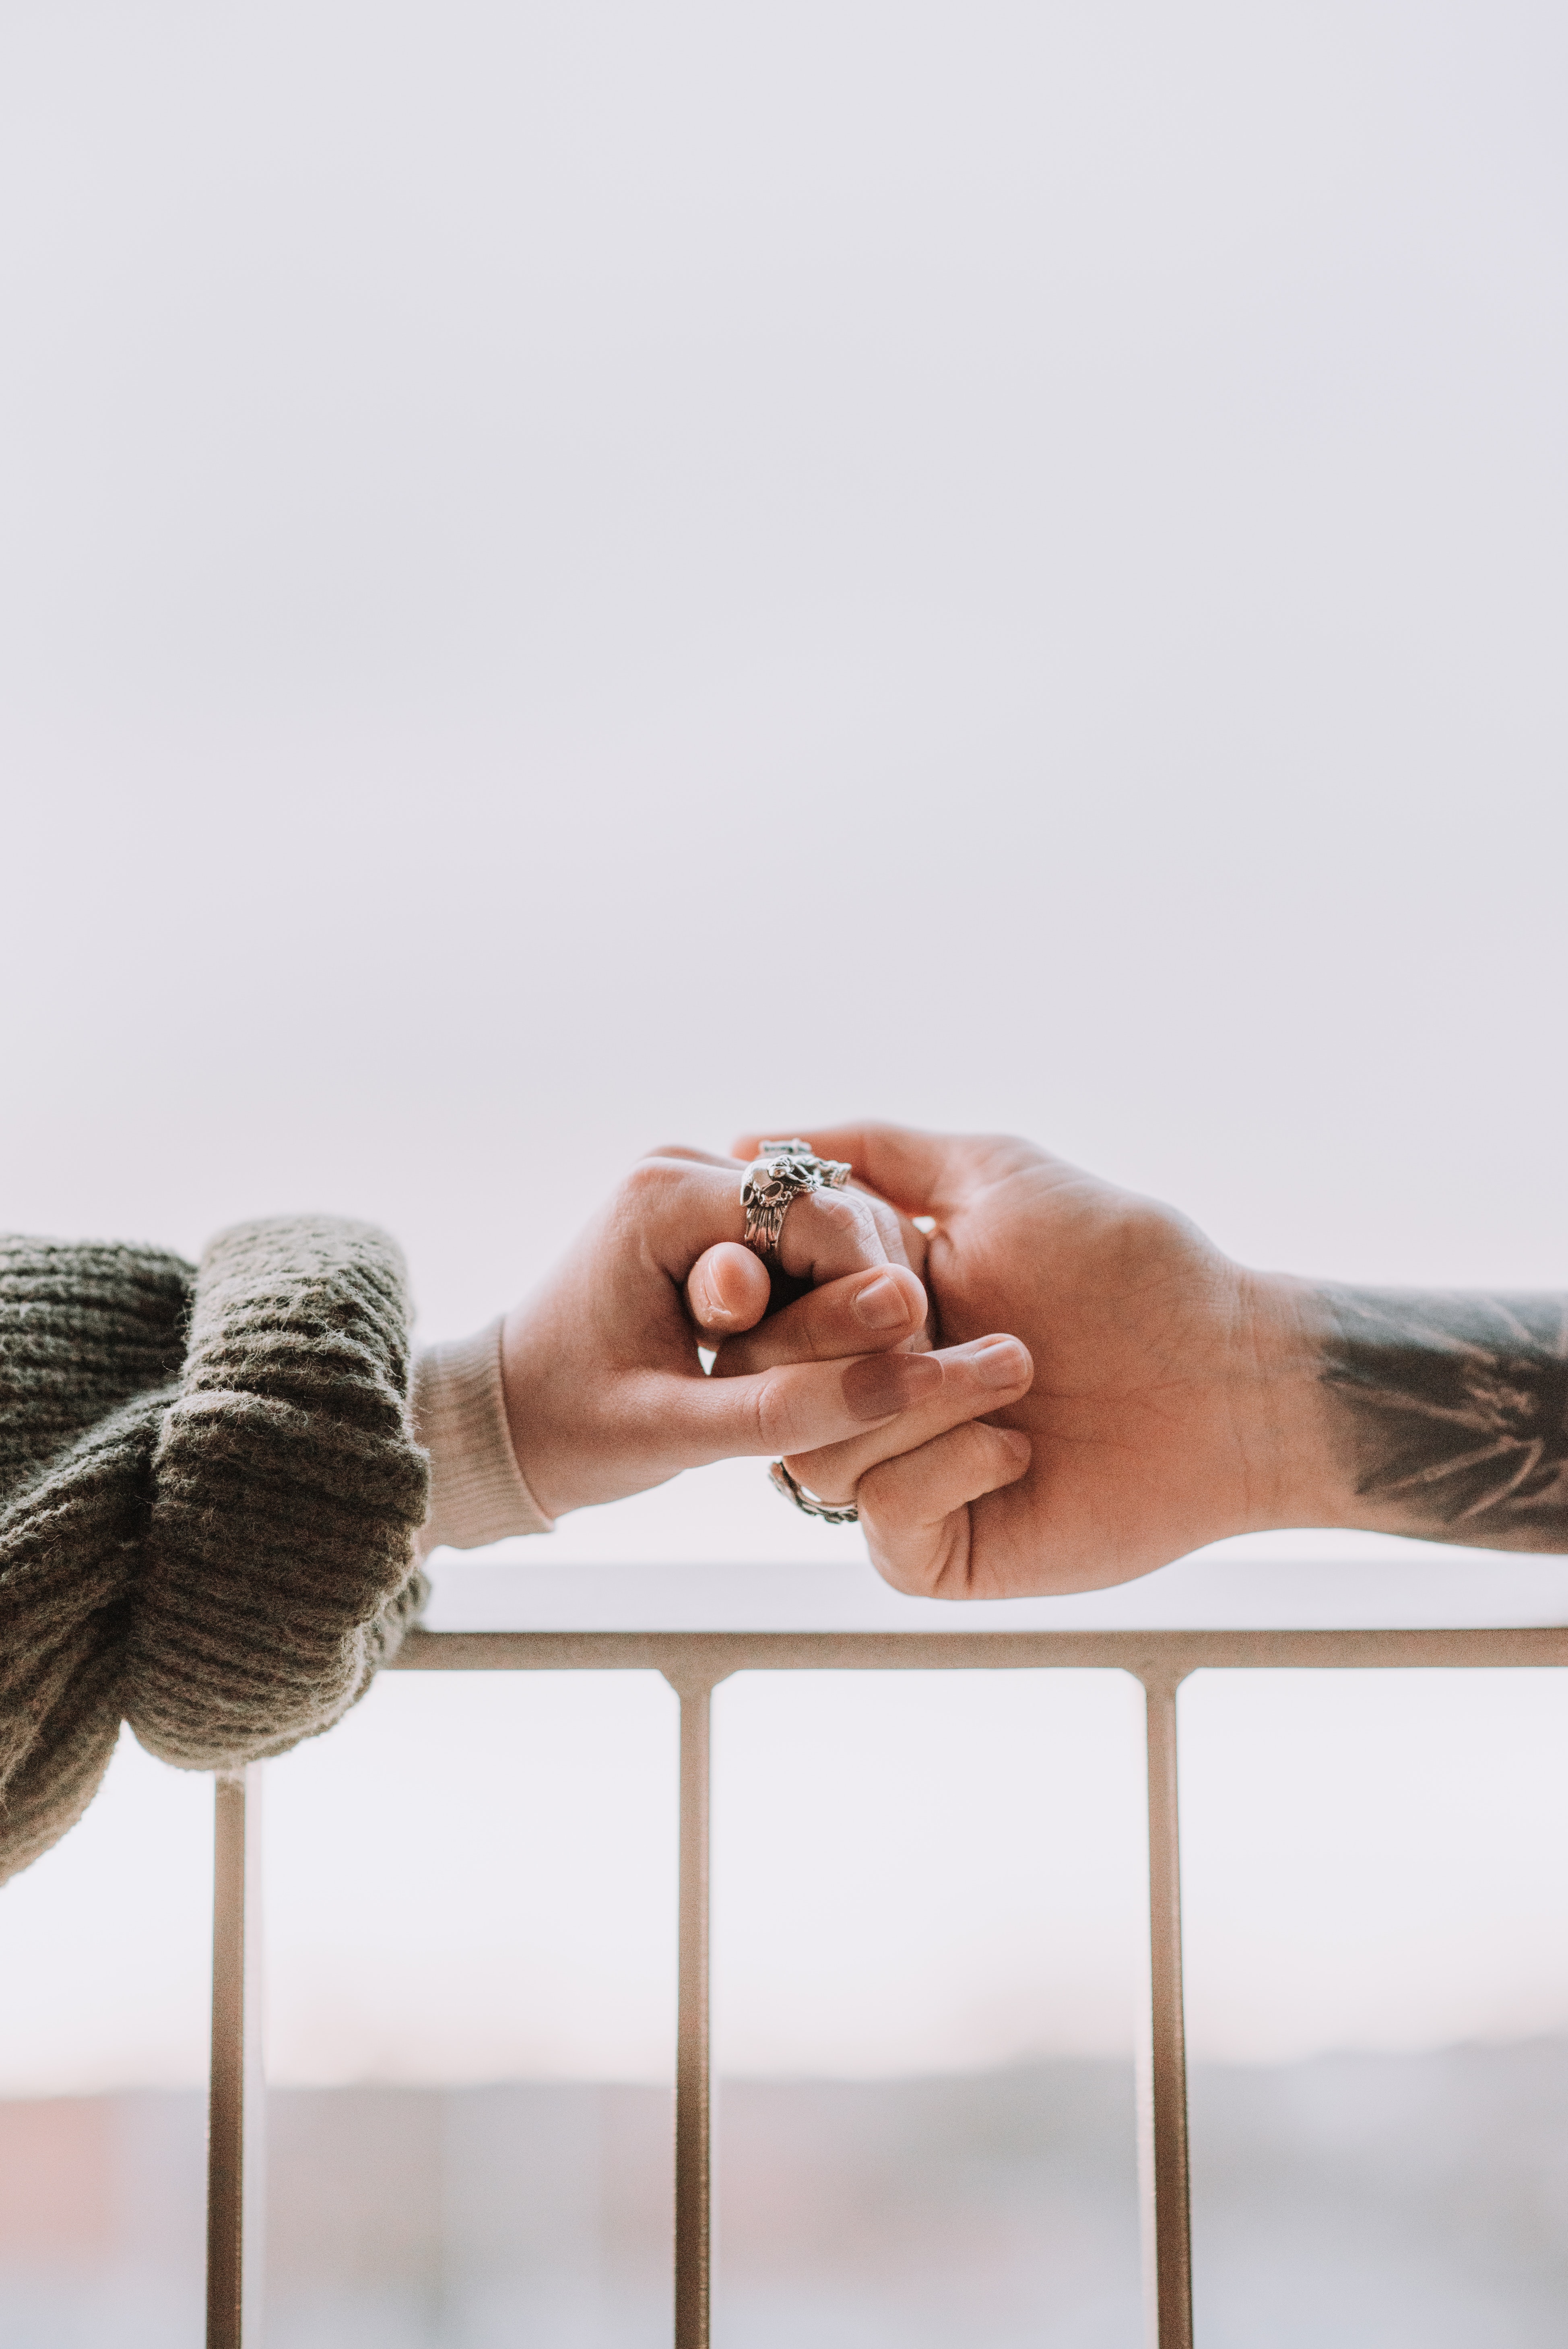 A couple holding hands. | Source: Pexels